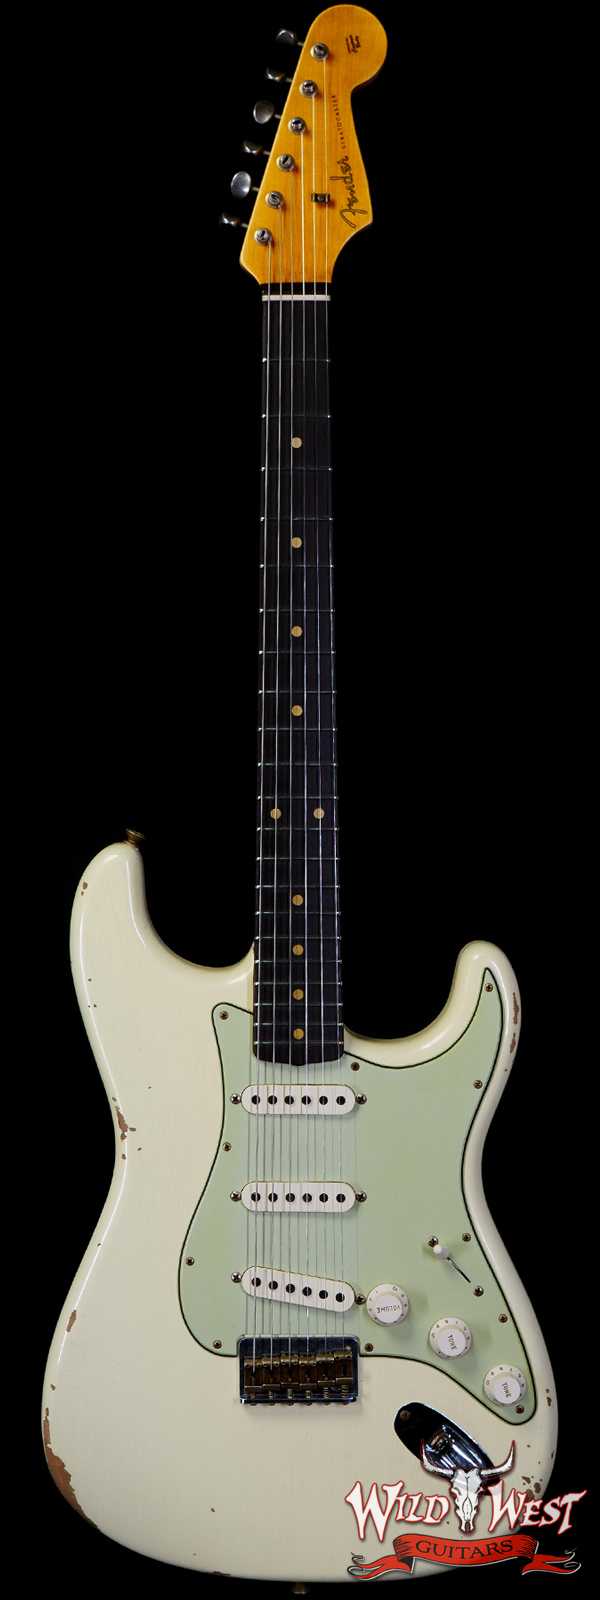 Fender Custom Shop 1962 Stratocaster Hardtail Hand-Wound Pickups AAA Dark Rosewood Slab Board Relic Vintage White 6.70 LBS